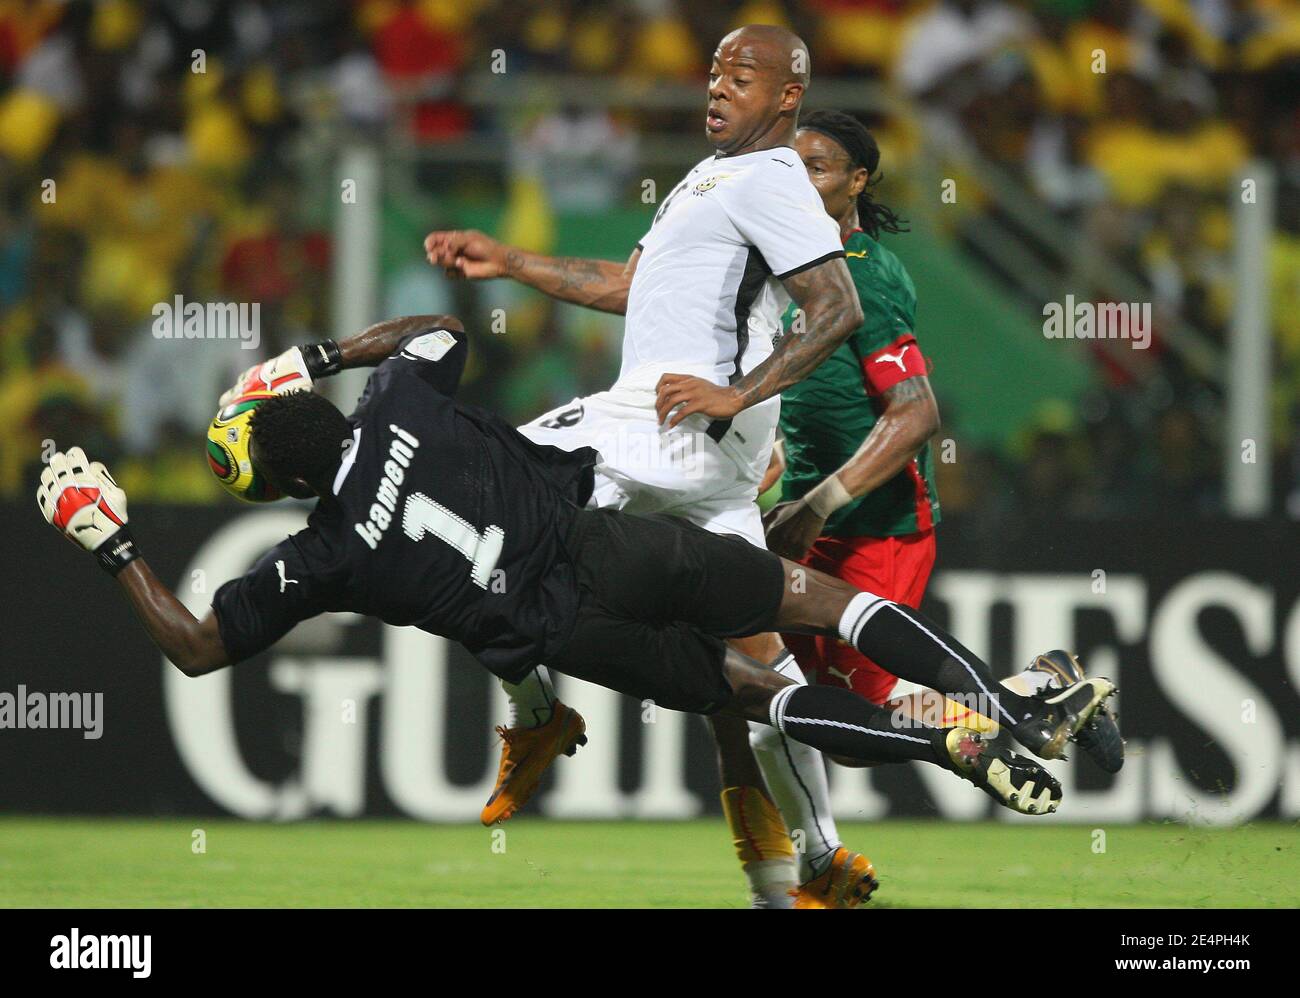 Cameroon's goalkeeper Carlos Kameni Idris saves the Ghana's Manuel Agogo kick during the African Cup of Nations Semi Final soccer match, Ghana vs Cameroon in Accra, Ghana on February 7, 2008. Cameroon are only one step away from a record-equalling fifth African Nations Cup title after wrecking Ghana's party with a 1-0 semi-final win over the hosts. Photo by Steeve McMay/Cameleon/ABACAPRESS.COM Stock Photo